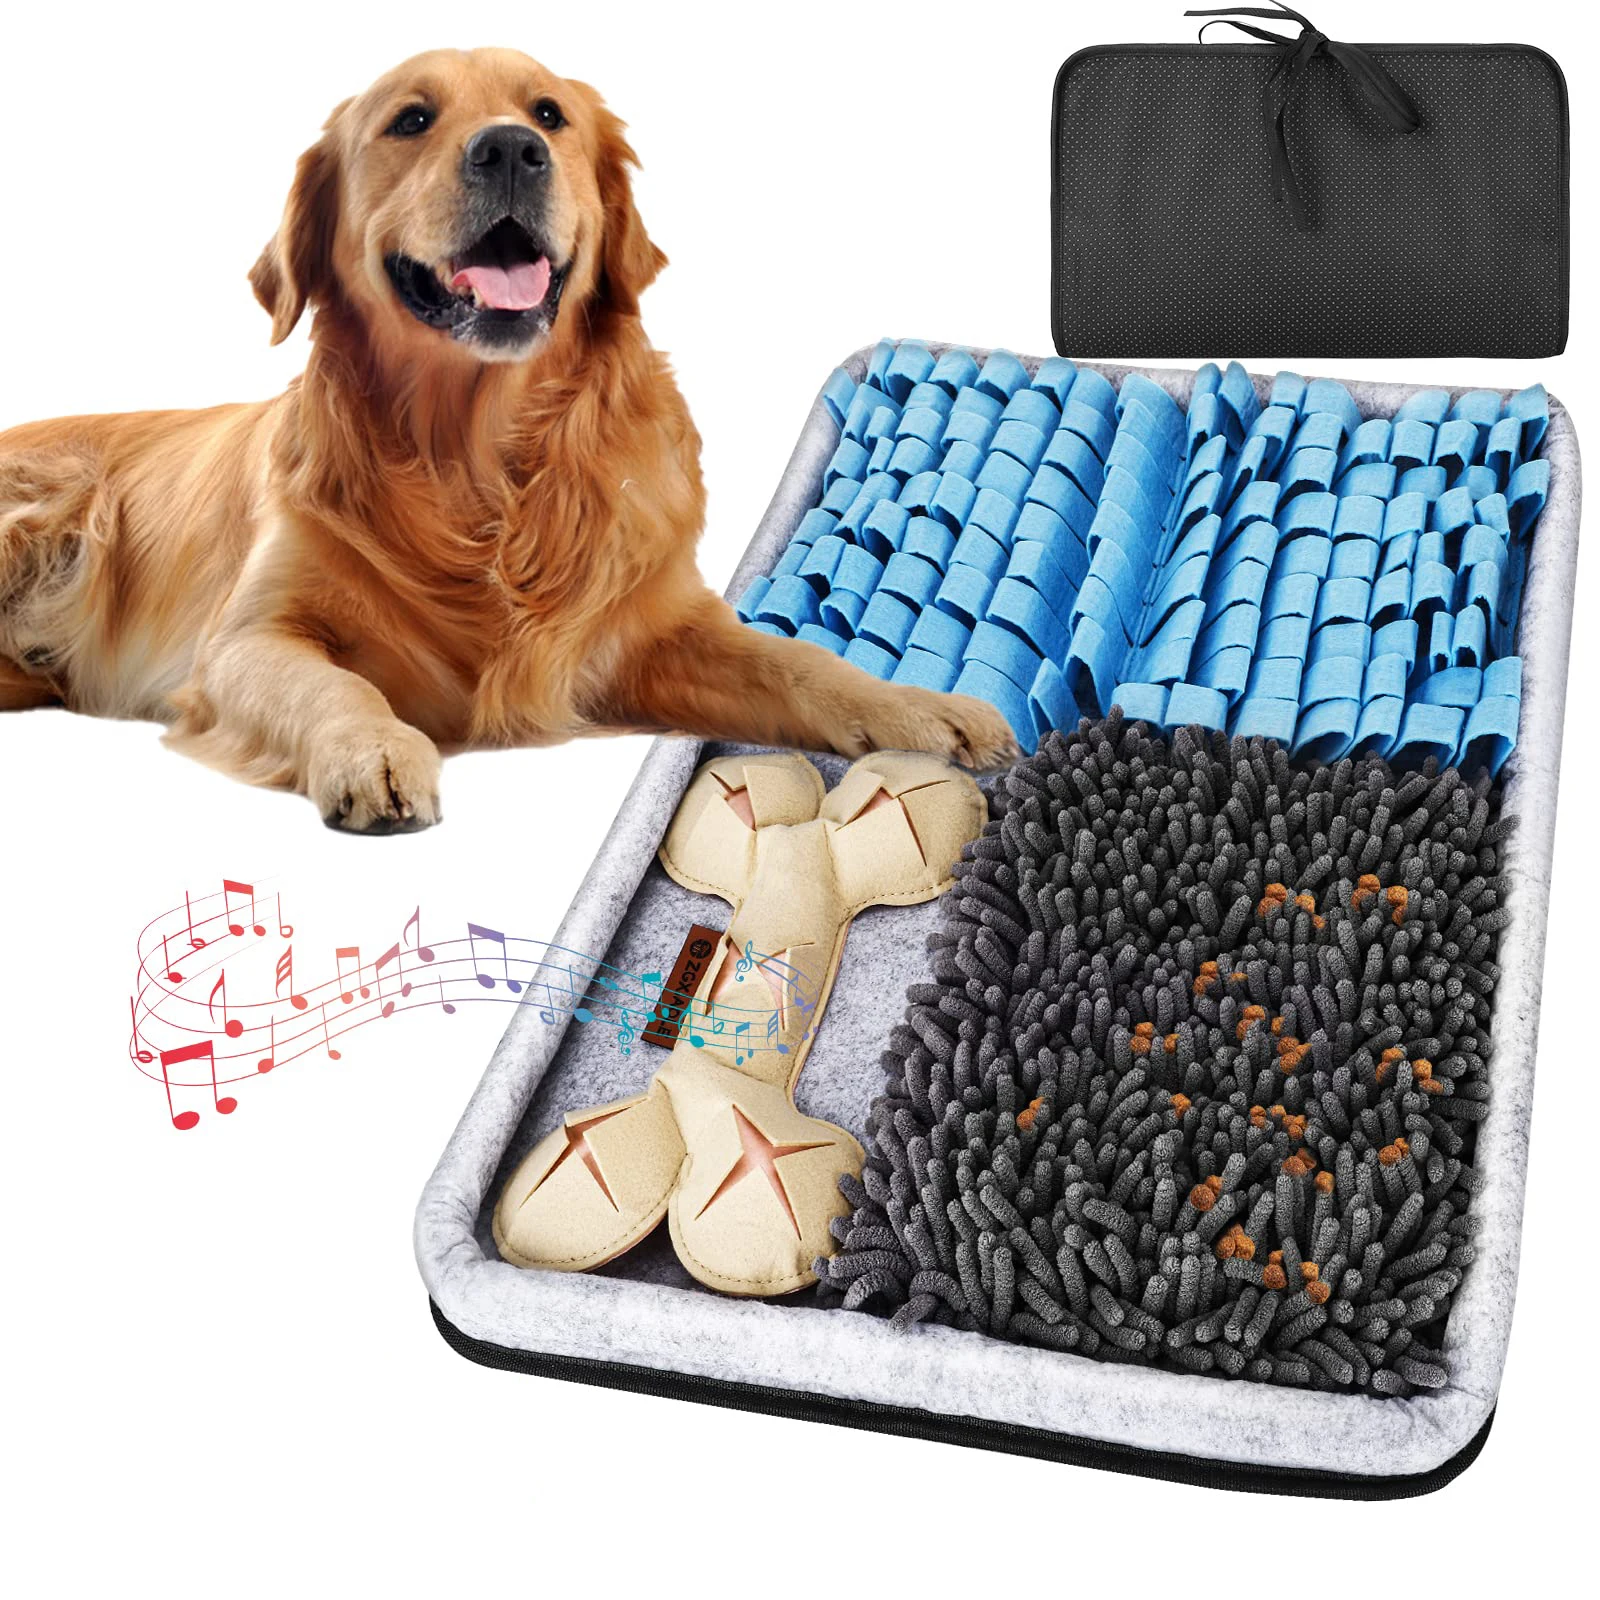 Smell Training and Slow Eating with Stress Relief Dog Snuffle Mat